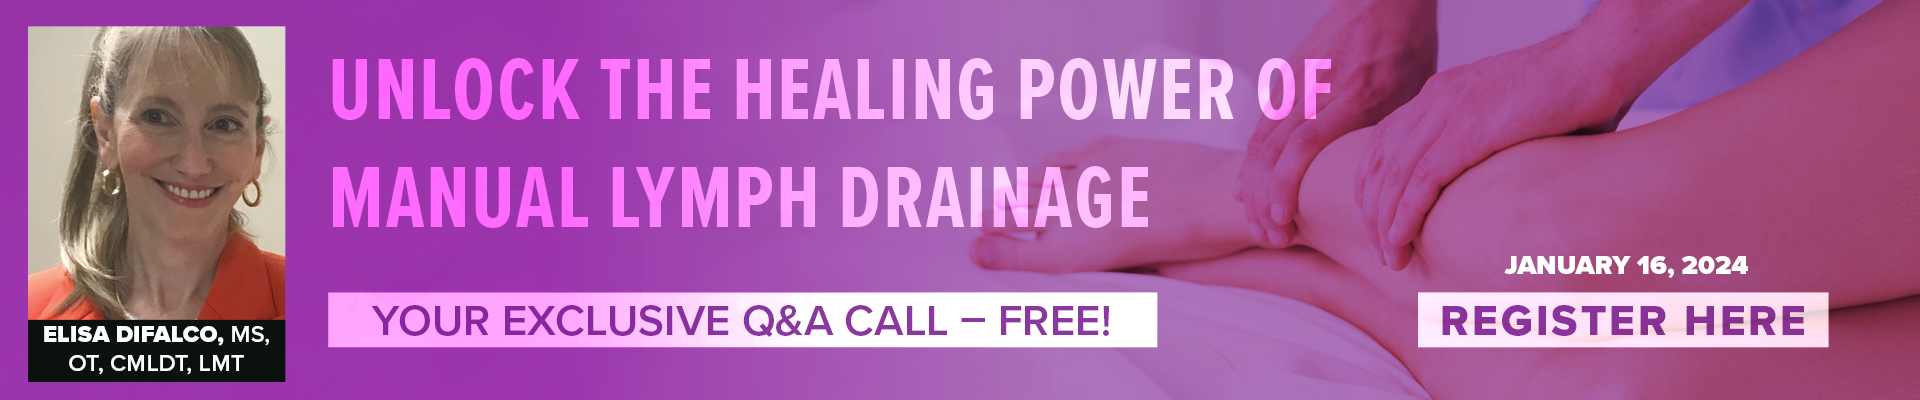 Unlock the Healing Power of Manual Lymph Drainage: Your Exclusive Q&A Call